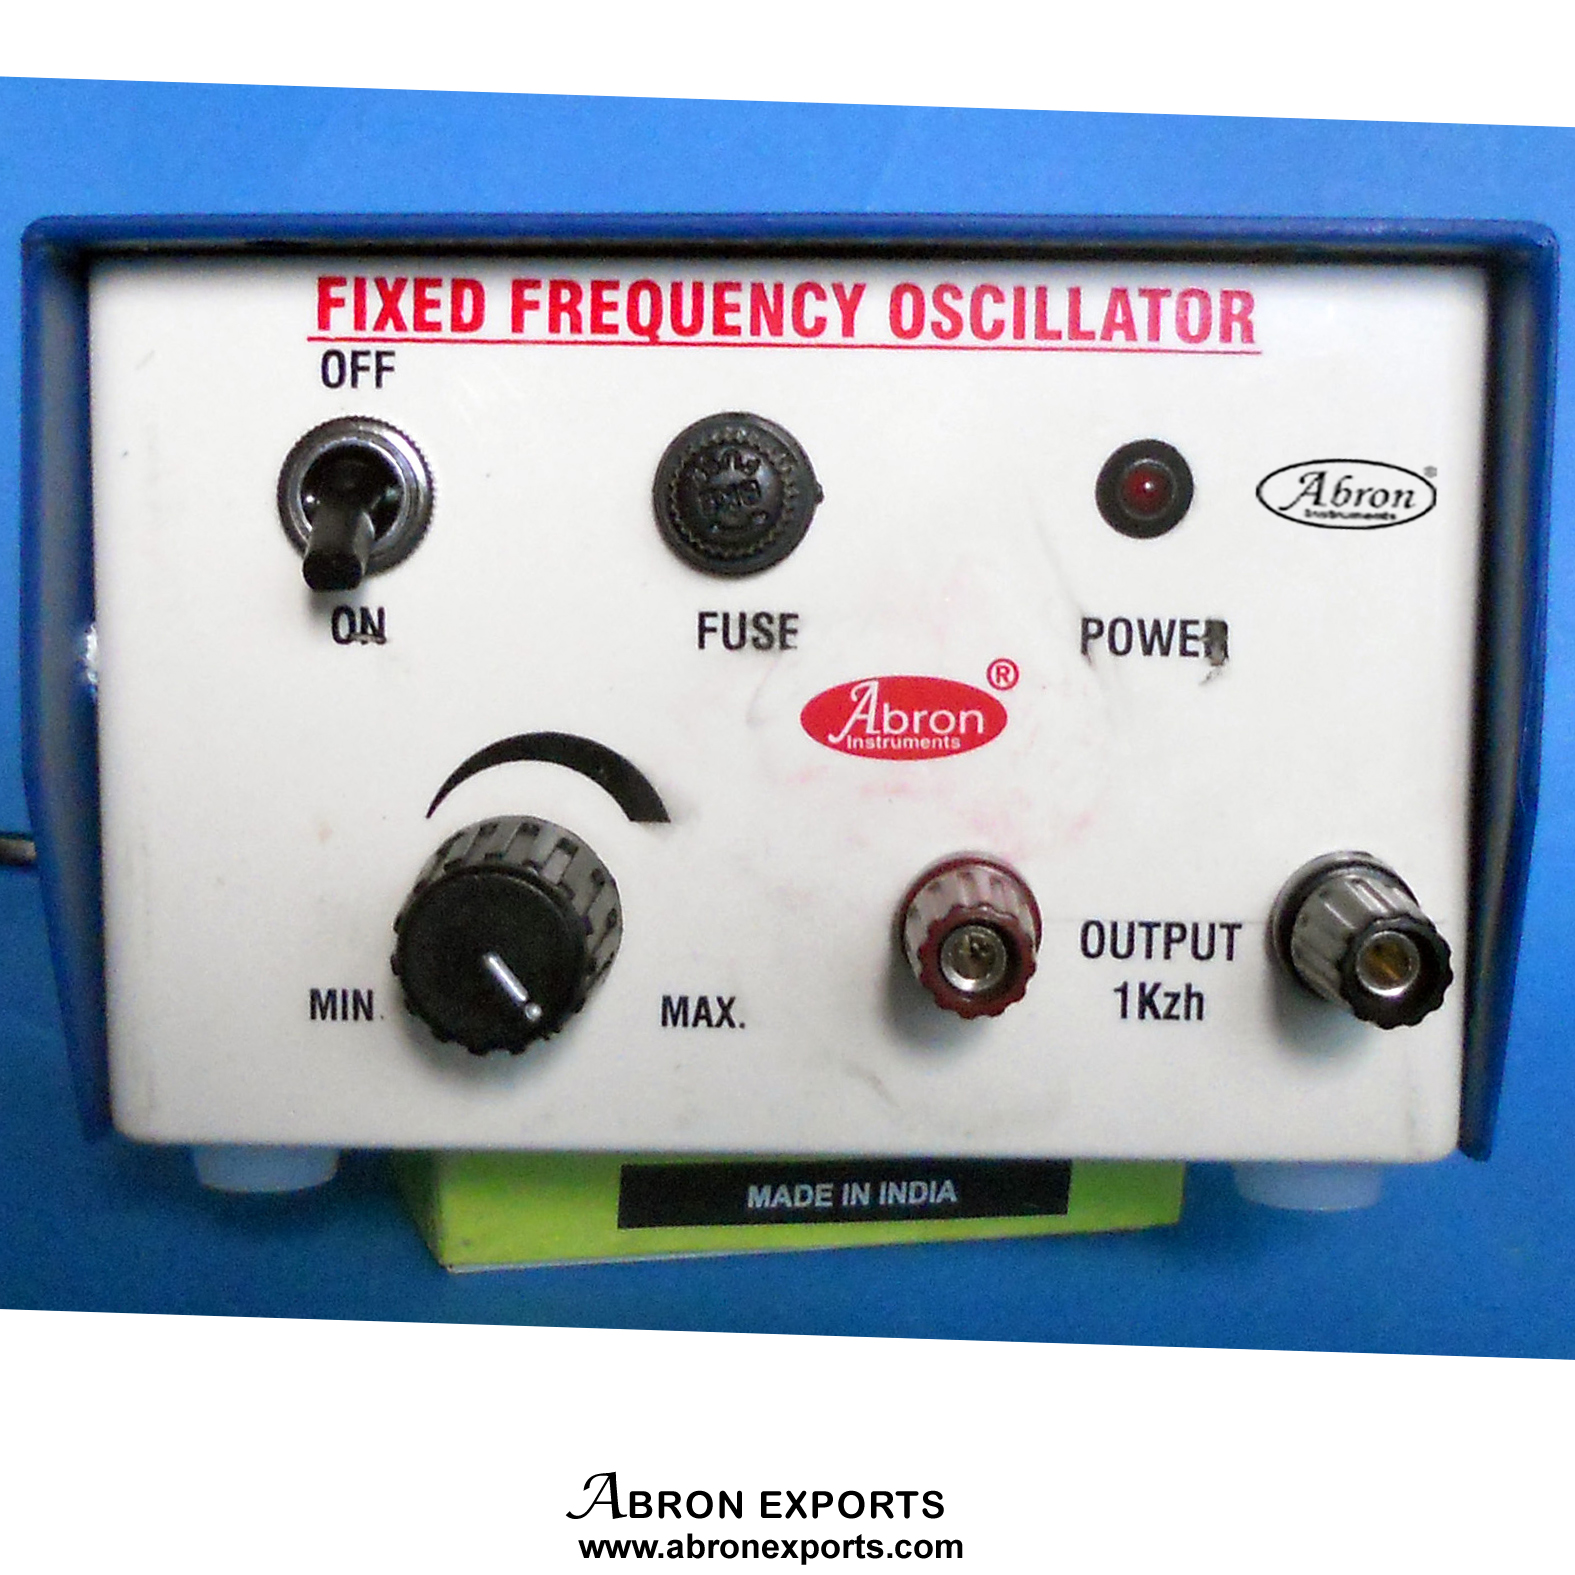 Audio Oscillator suitable for bridge experiments fixed frequency IC Sine wave 100KHz AE-1349A	